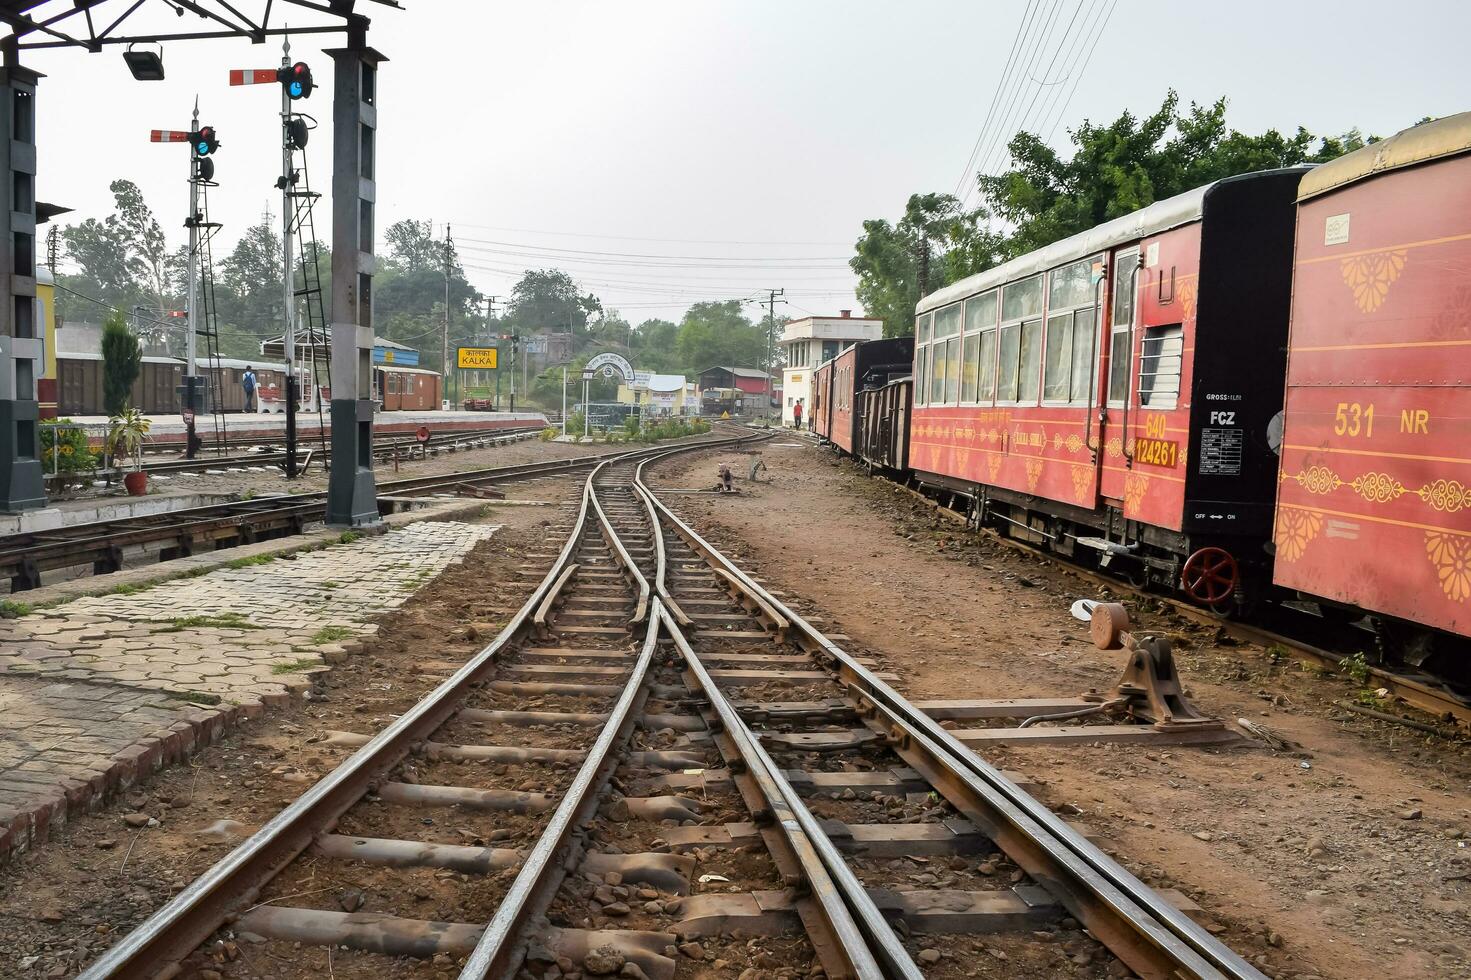 Kalka, India, March 16 2023 - View of Toy train Railway Tracks from the middle during daytime near Kalka railway station in India, Toy train track view, Indian Railway junction, Heavy industry photo